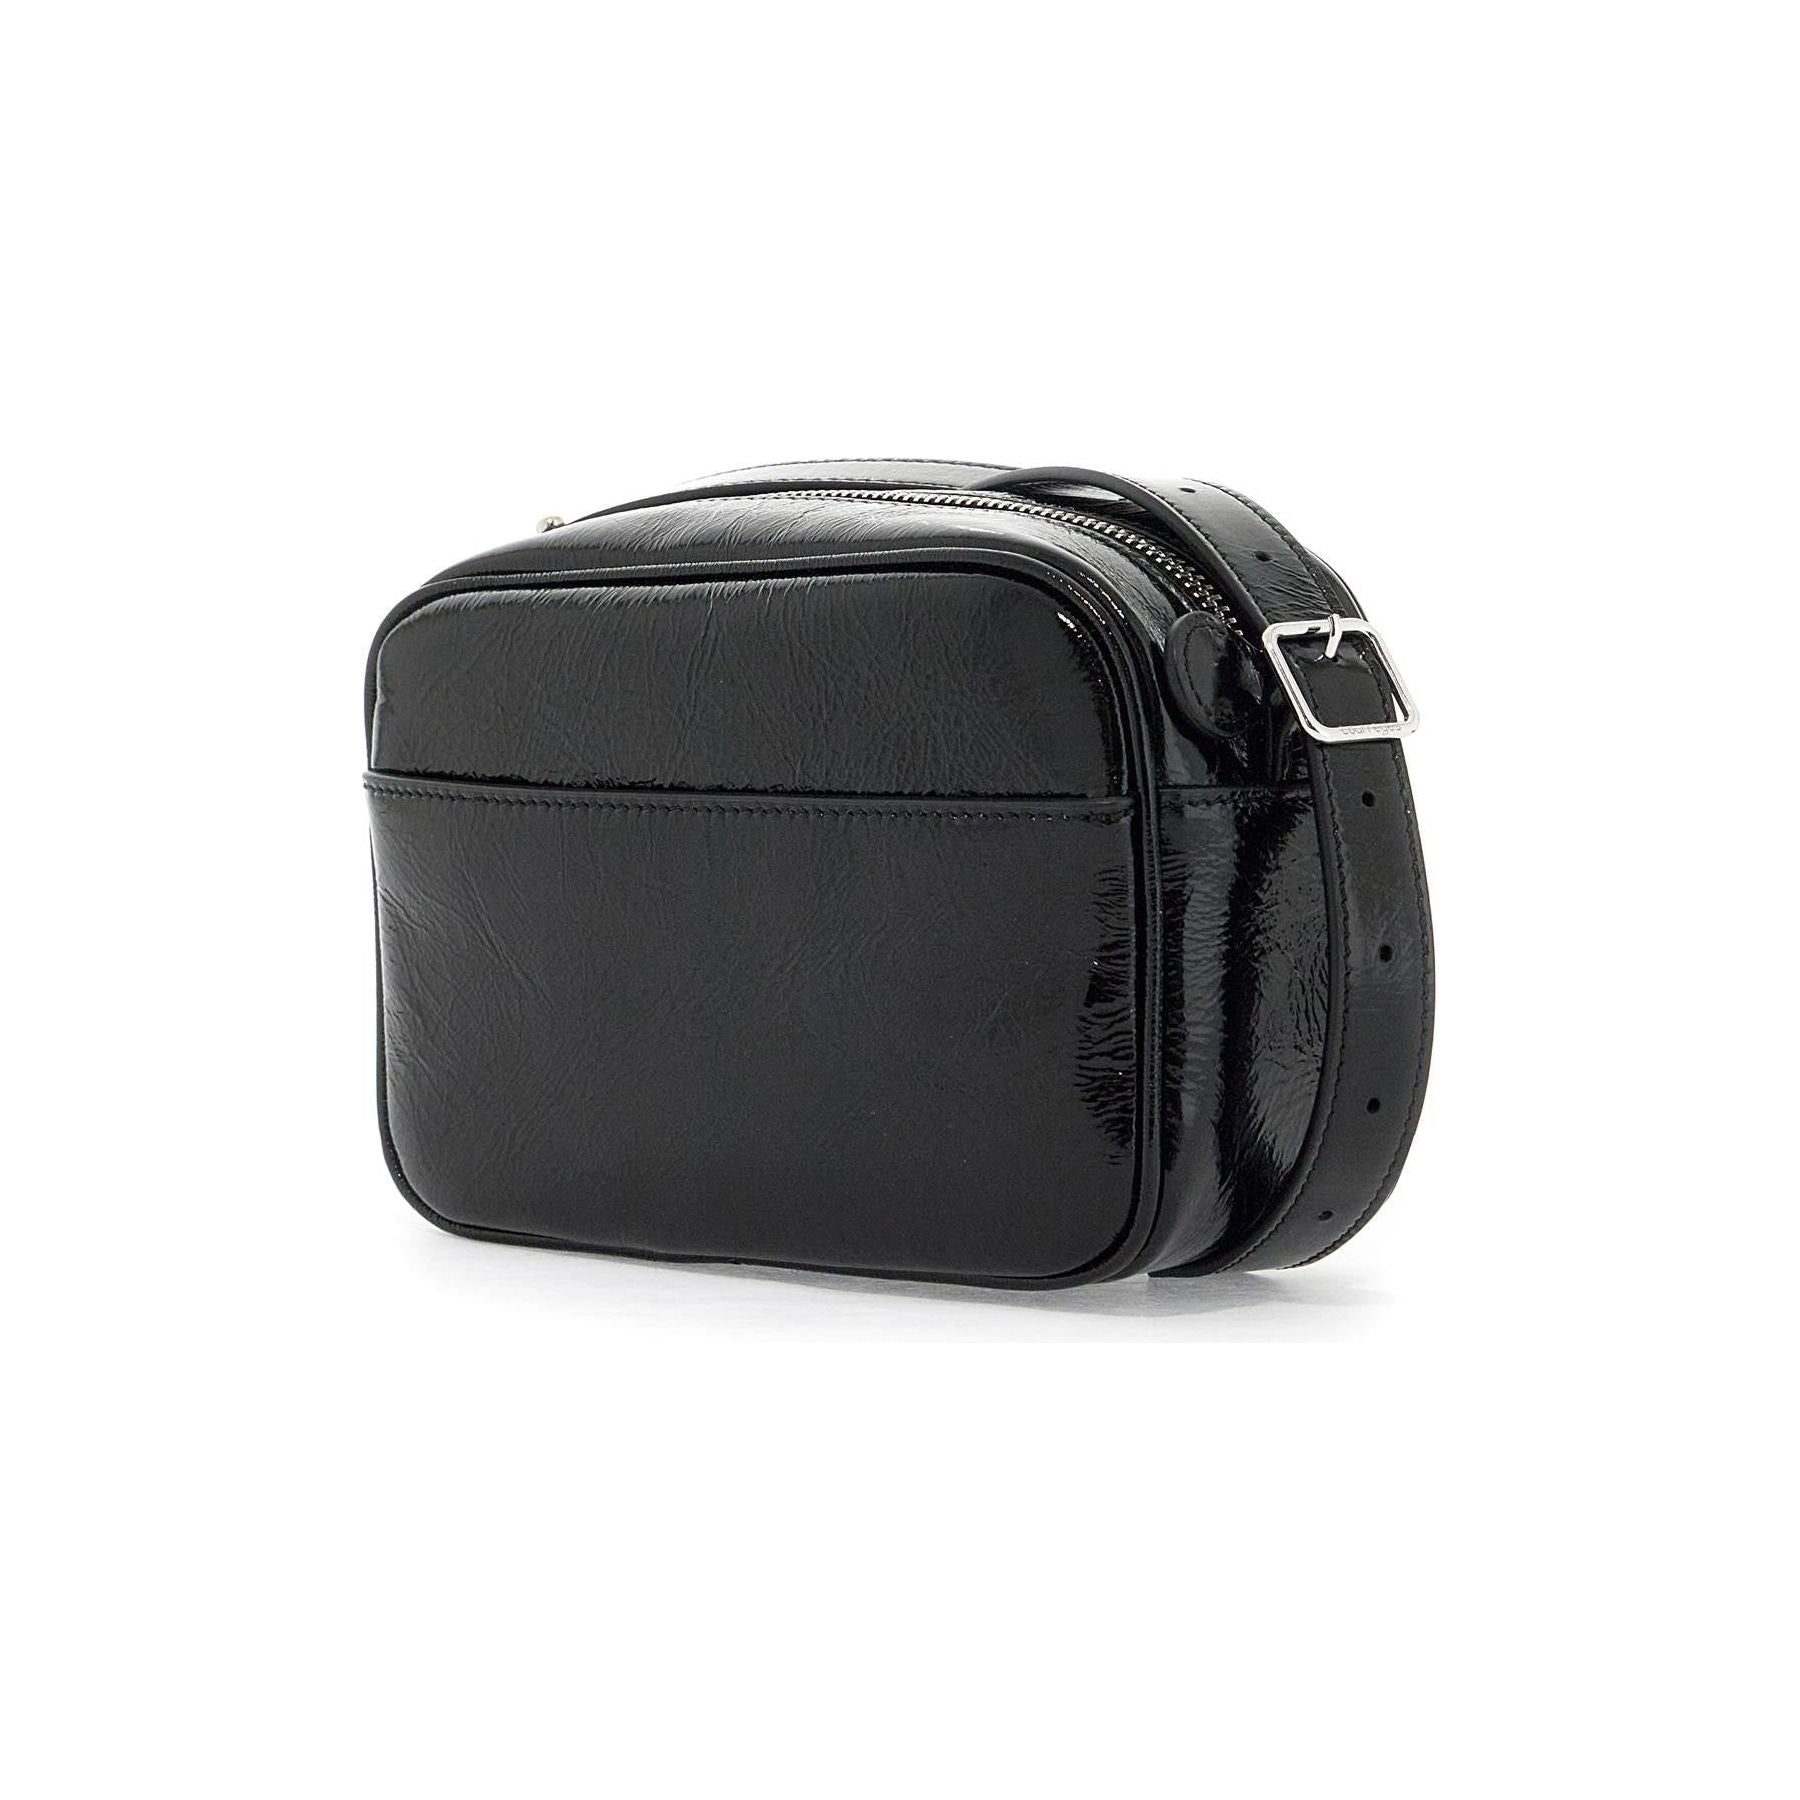 Patent Leather Reedition Camera Bag